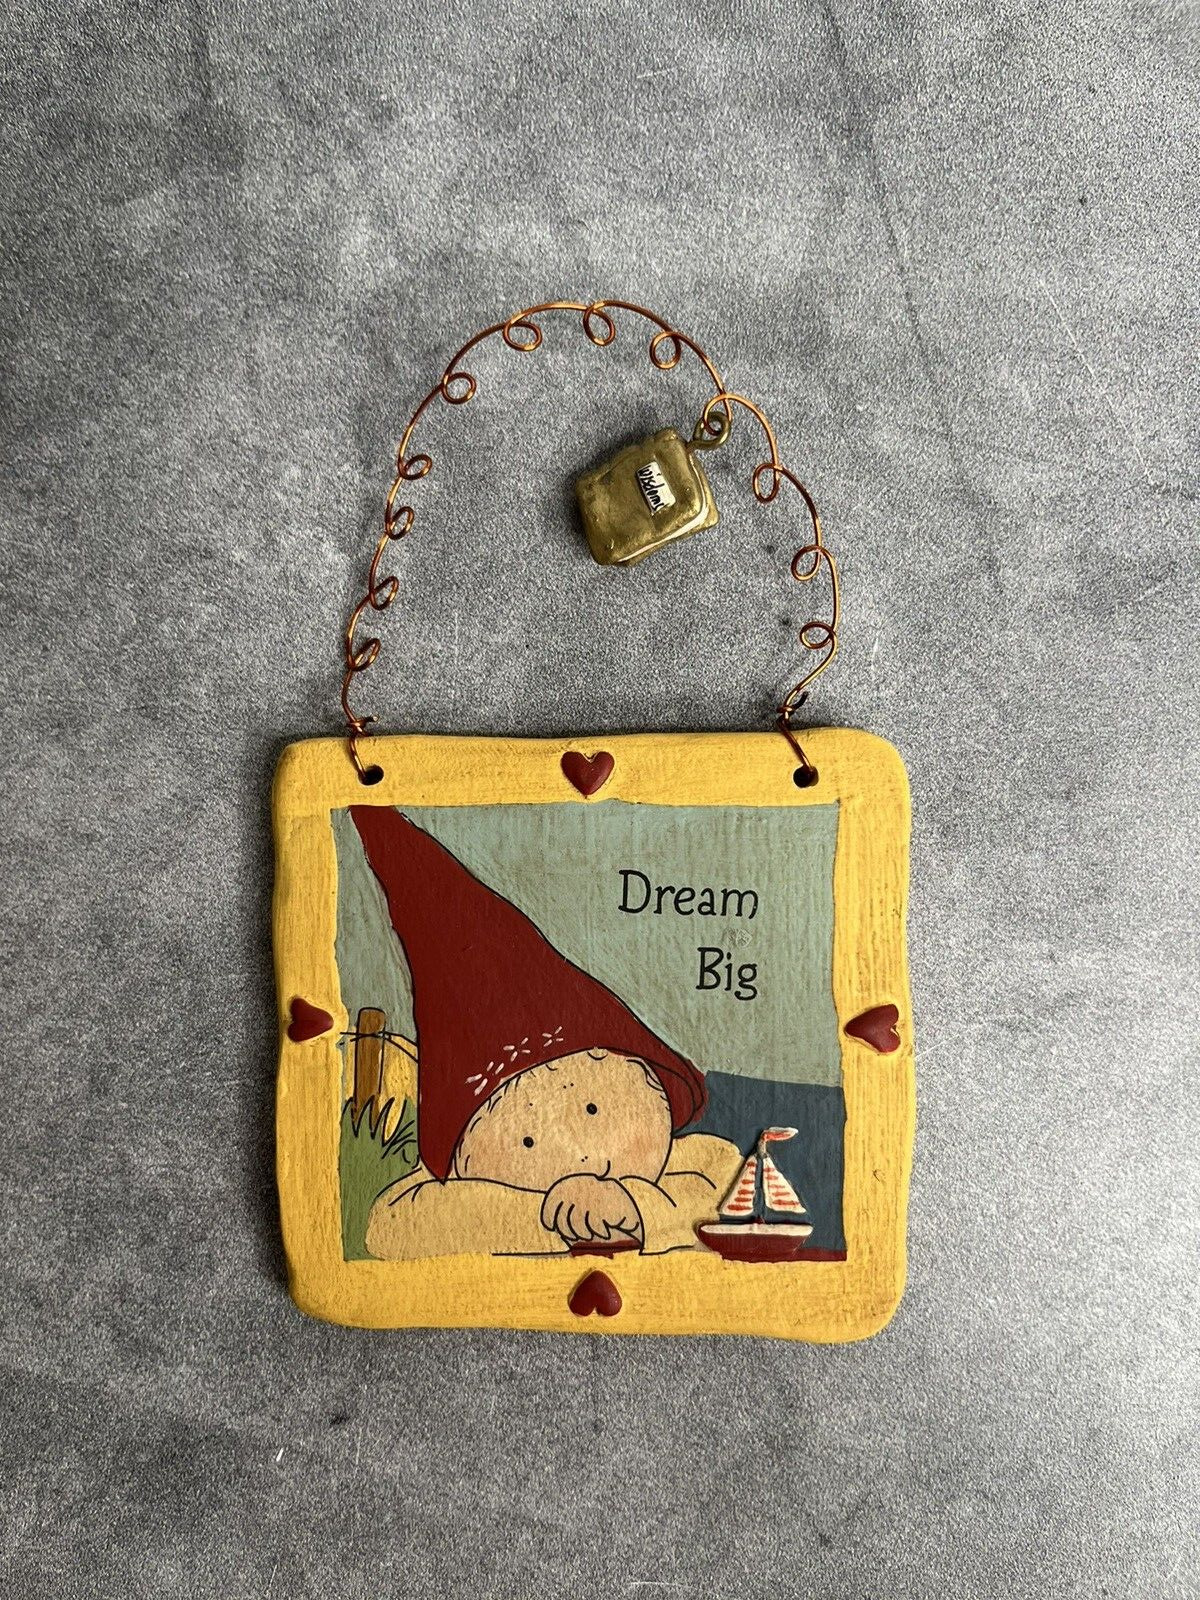 Gnomy’s Diaries By Annekabouke 3x3 Decorative Tile Dream Big